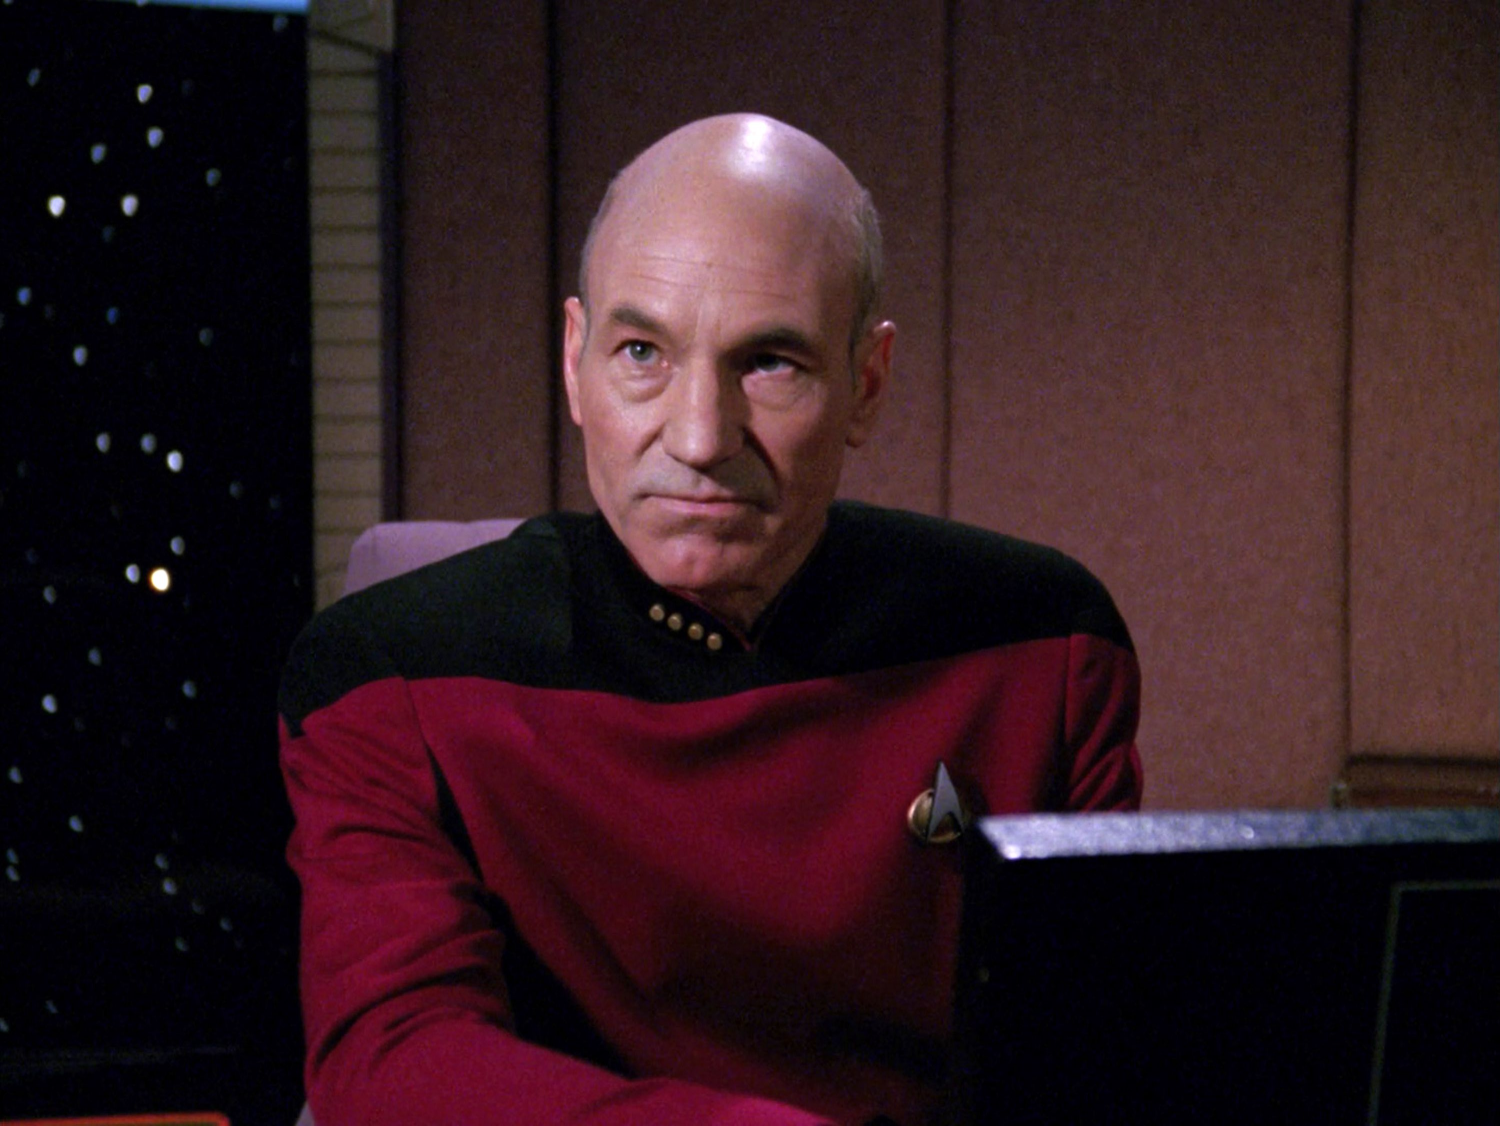 High Quality PICARD LOOKS UP FROM THE MONITOR ANGRILY Blank Meme Template